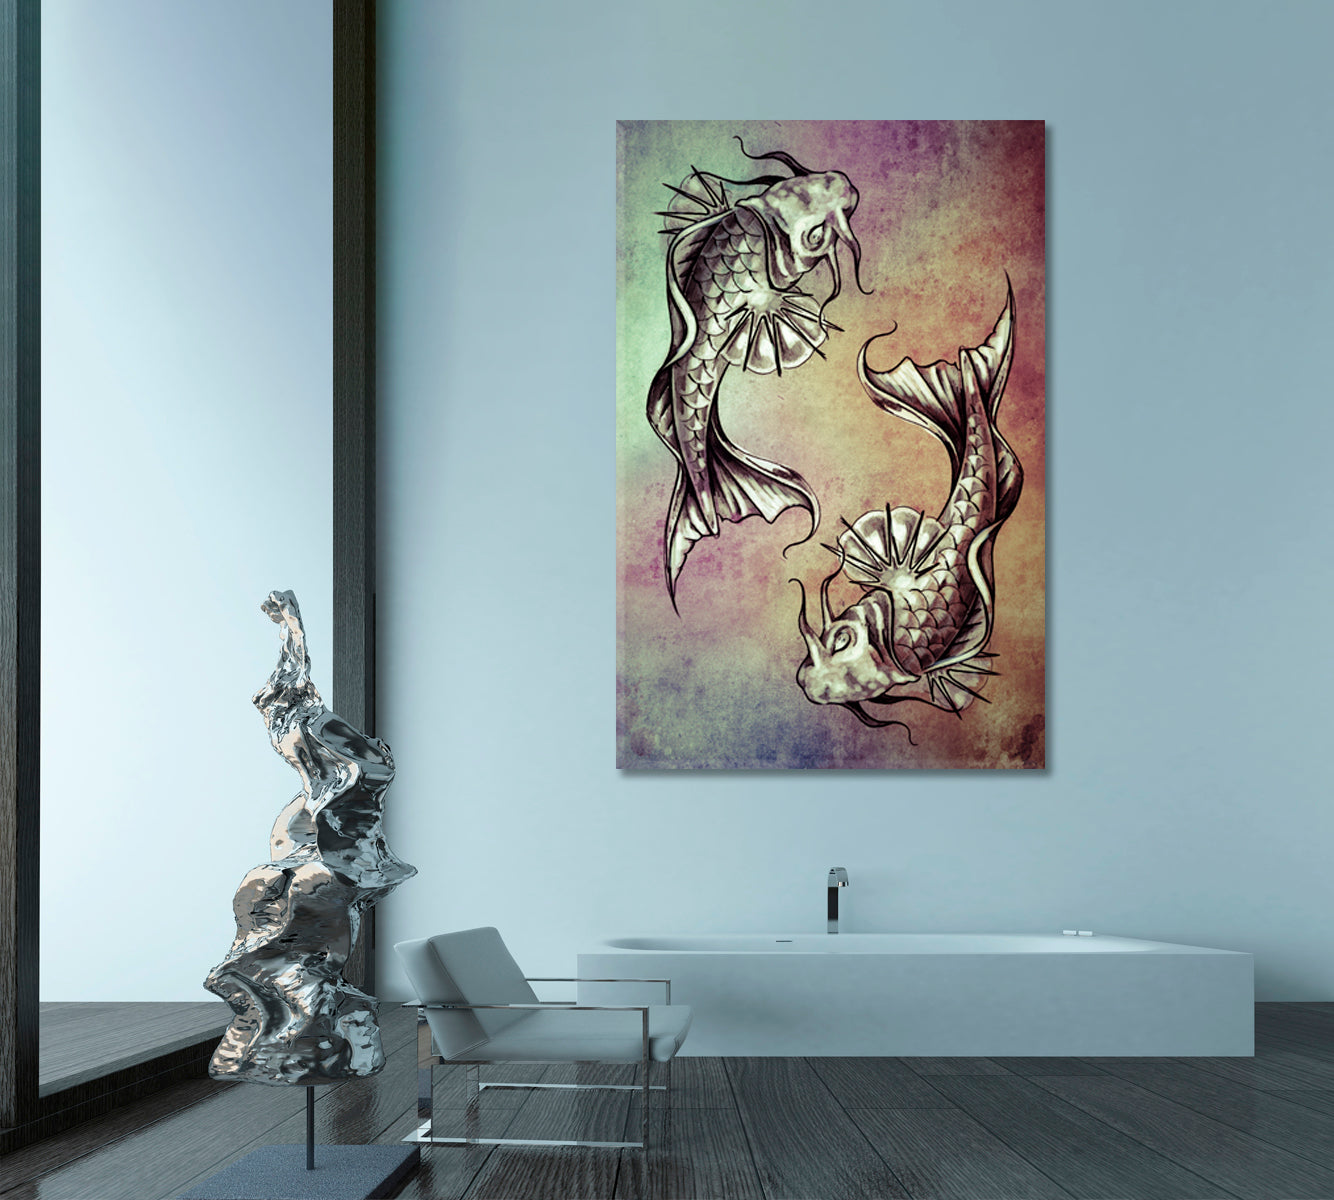 JAPANESE GOLDFISH Symbol of Good Fortune and Luck Koi Fishes Japanese Style Vintage - Square Panel - Vertical 1 panel Asian Style Canvas Print Wall Art Artesty 1 Panel 16"x24" 